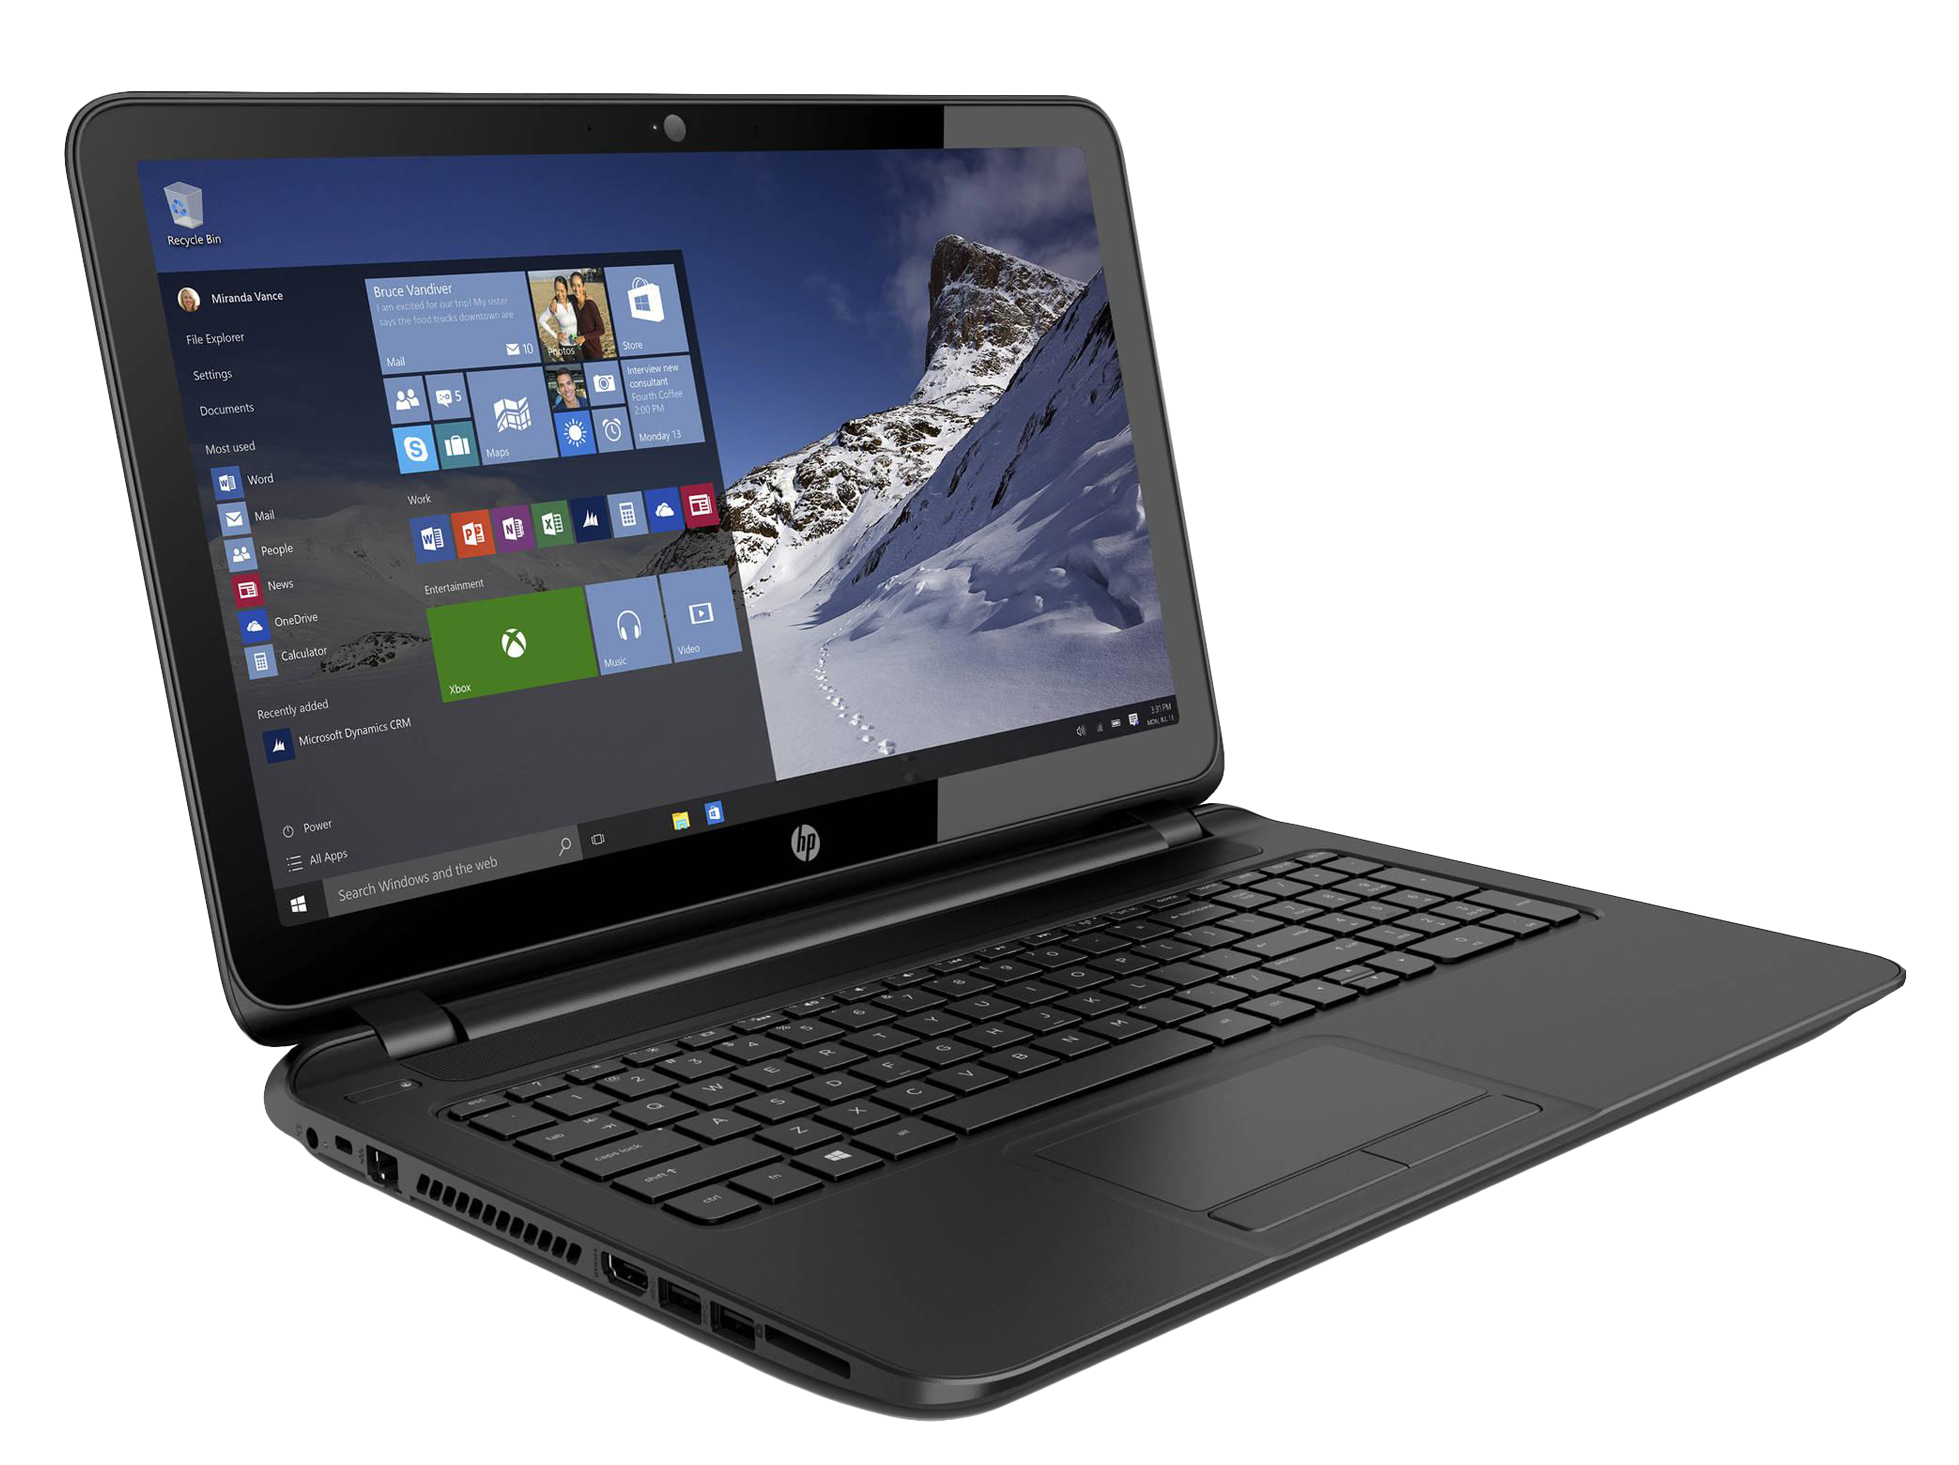 Laptop transparent free only. Computer images png